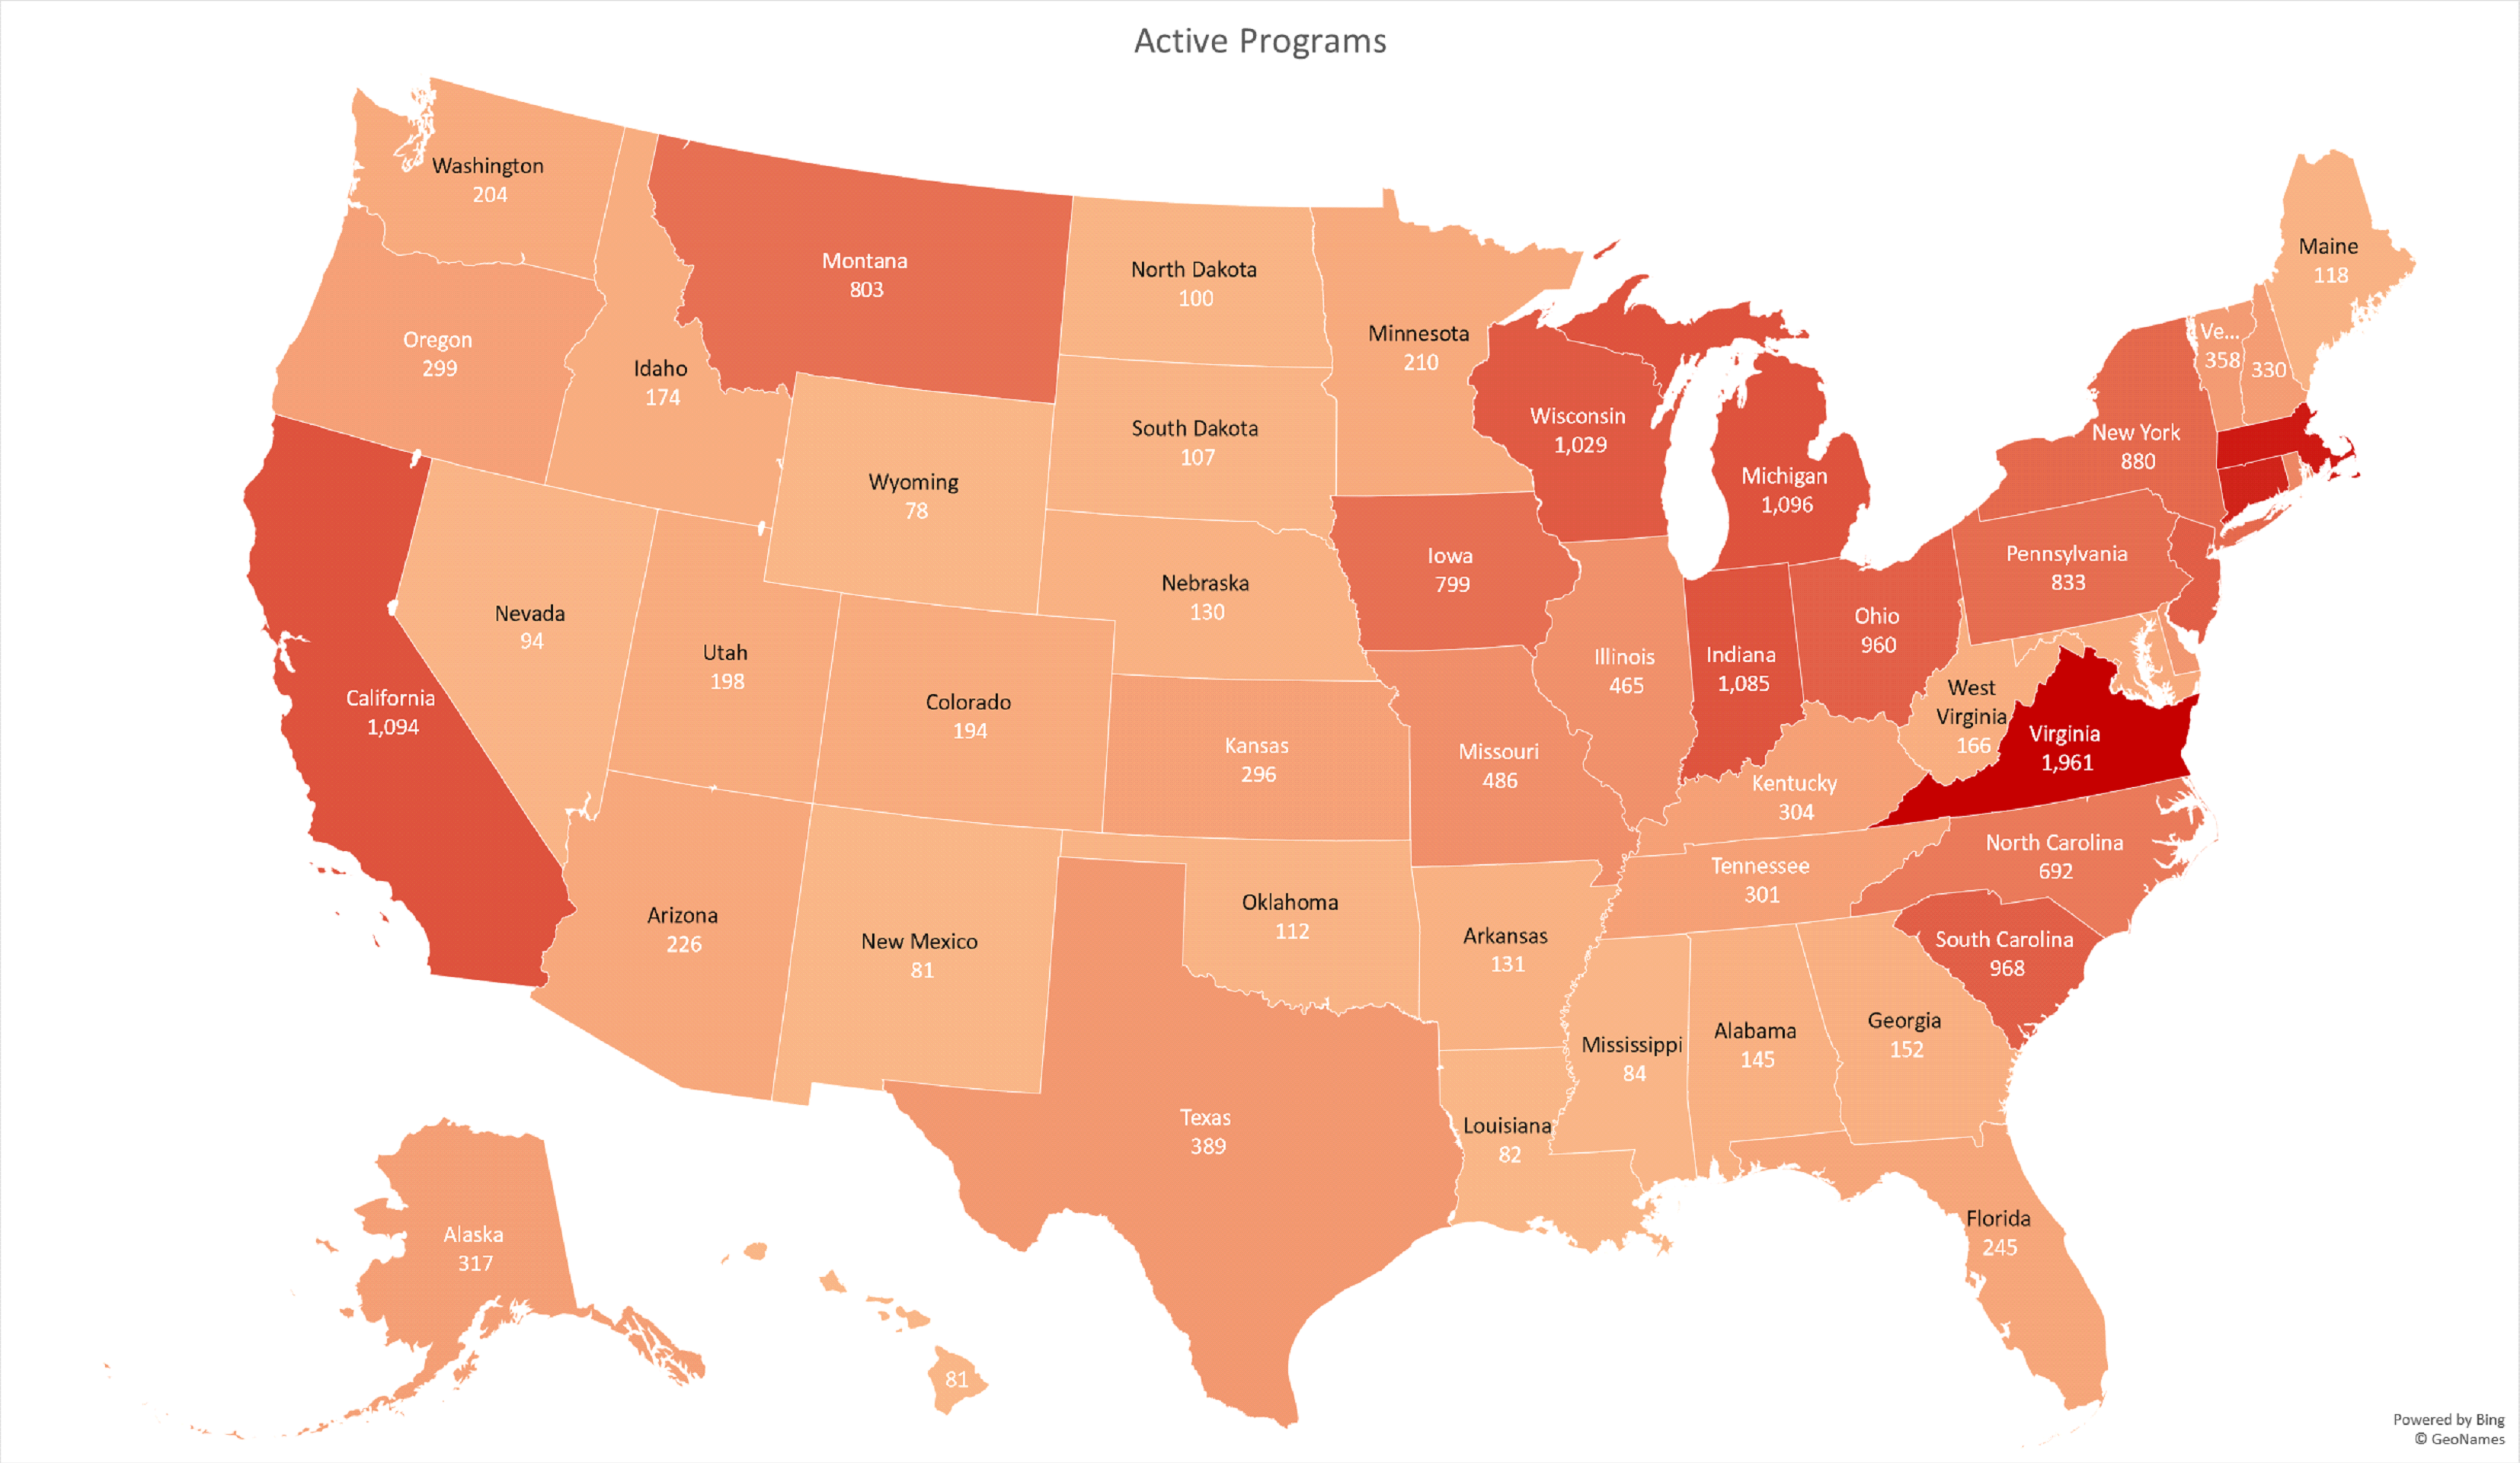 Image of Active Programs 2019 State Map